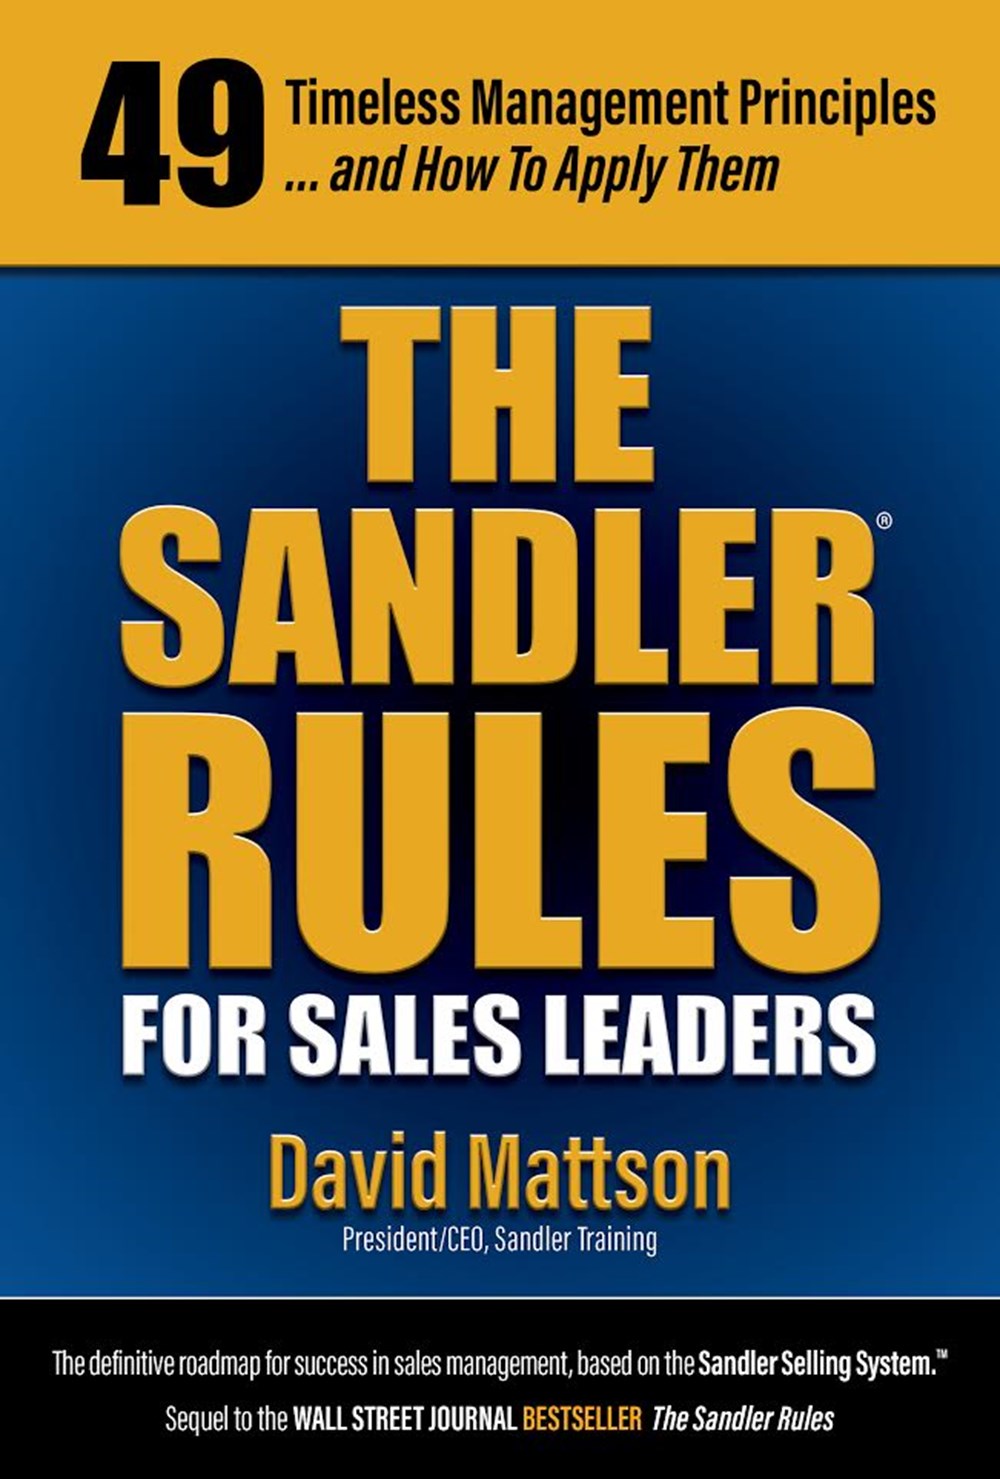 Sandler Rules for Sales Leaders 49 Timeless Management Principles . . . And How To Apply Them